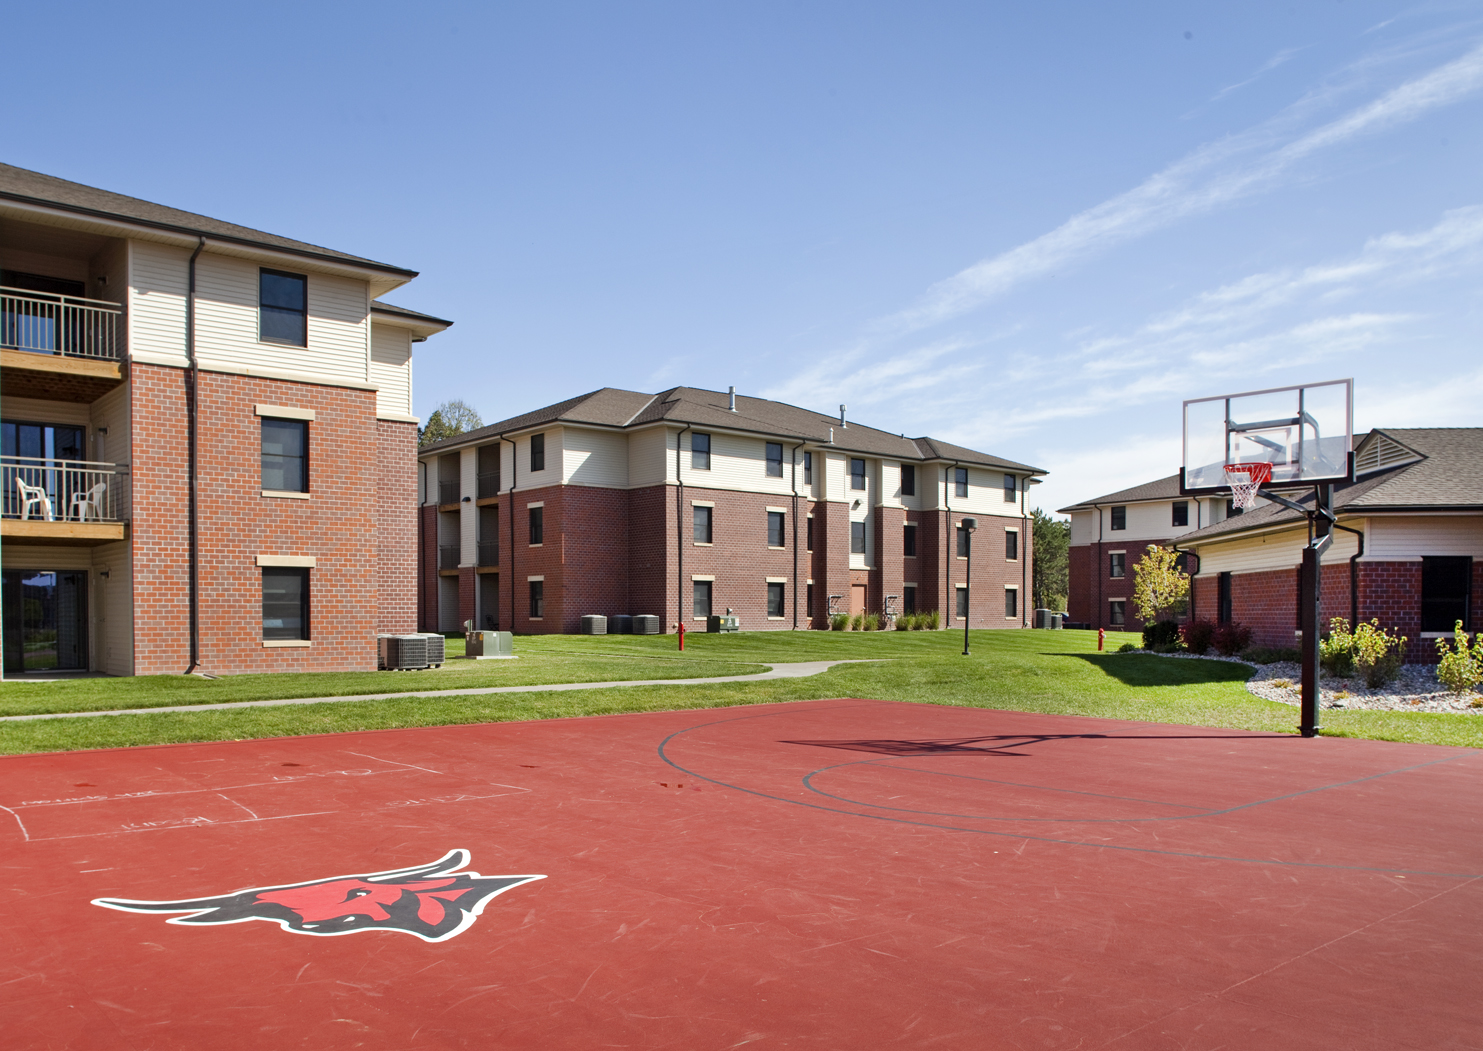 Full-court basketball right outside your door.